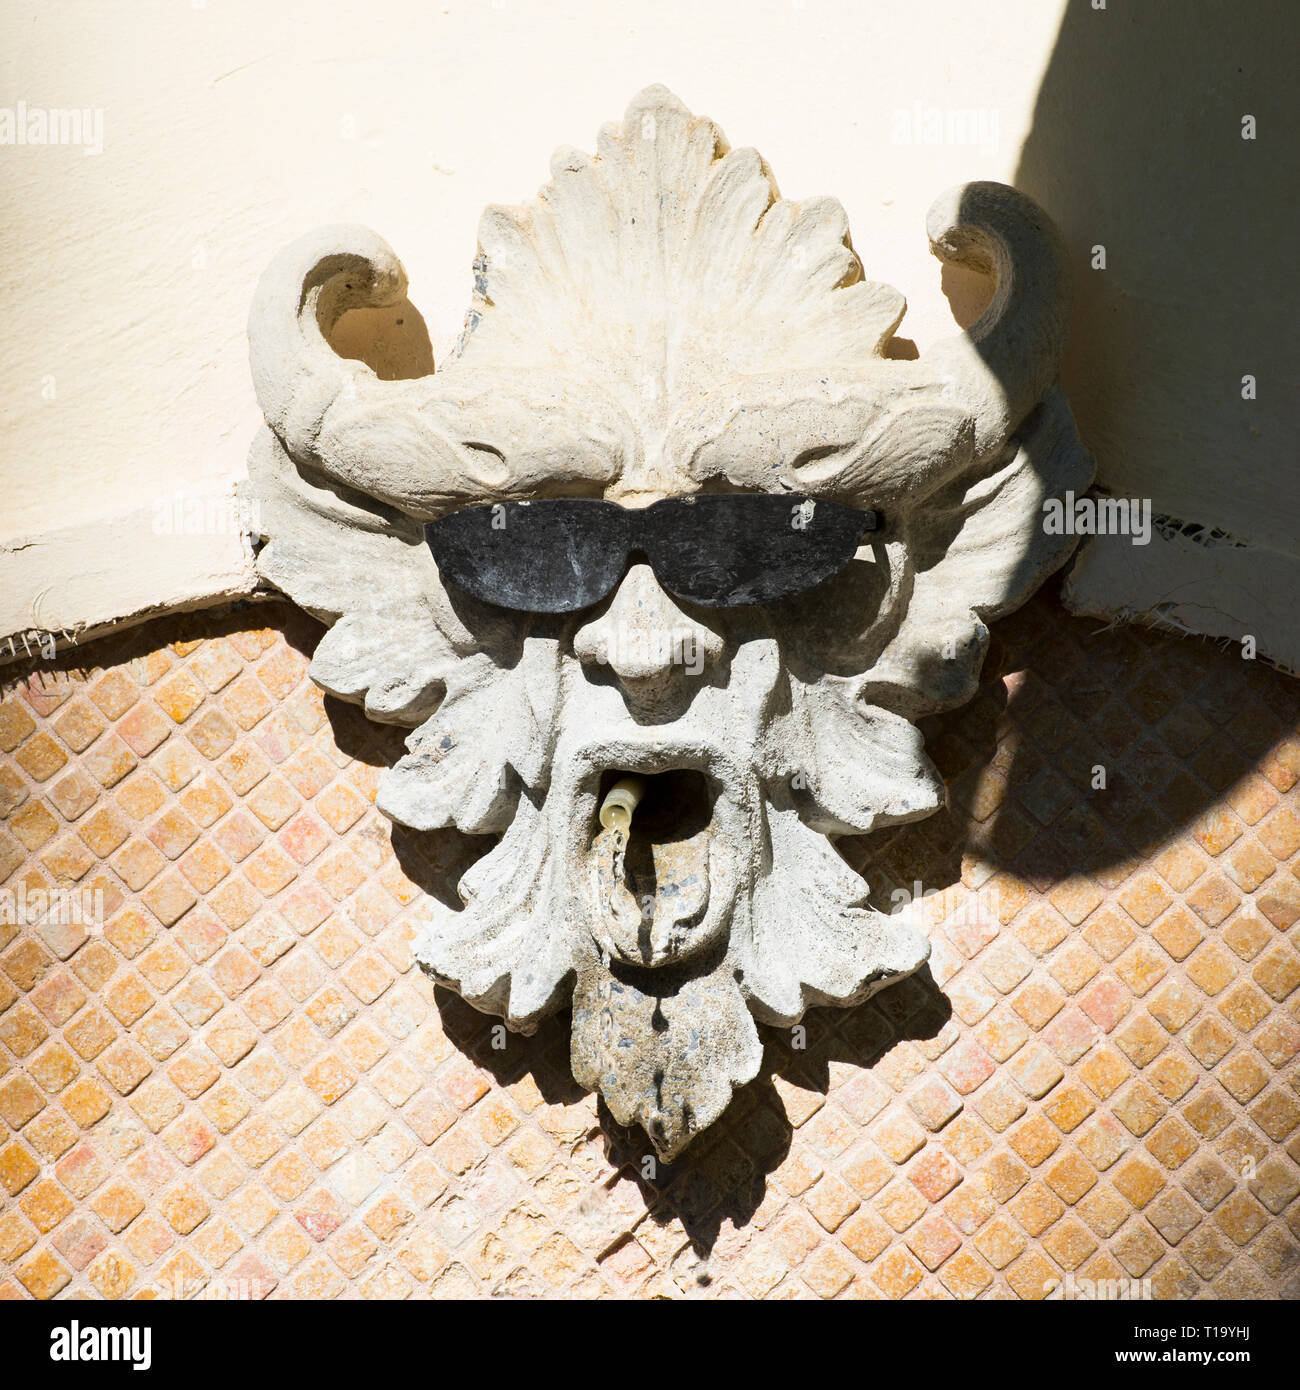 https://c8.alamy.com/comp/T19YHJ/funny-gargoyle-water-spout-with-sunglasses-left-by-a-passing-tourist-T19YHJ.jpg